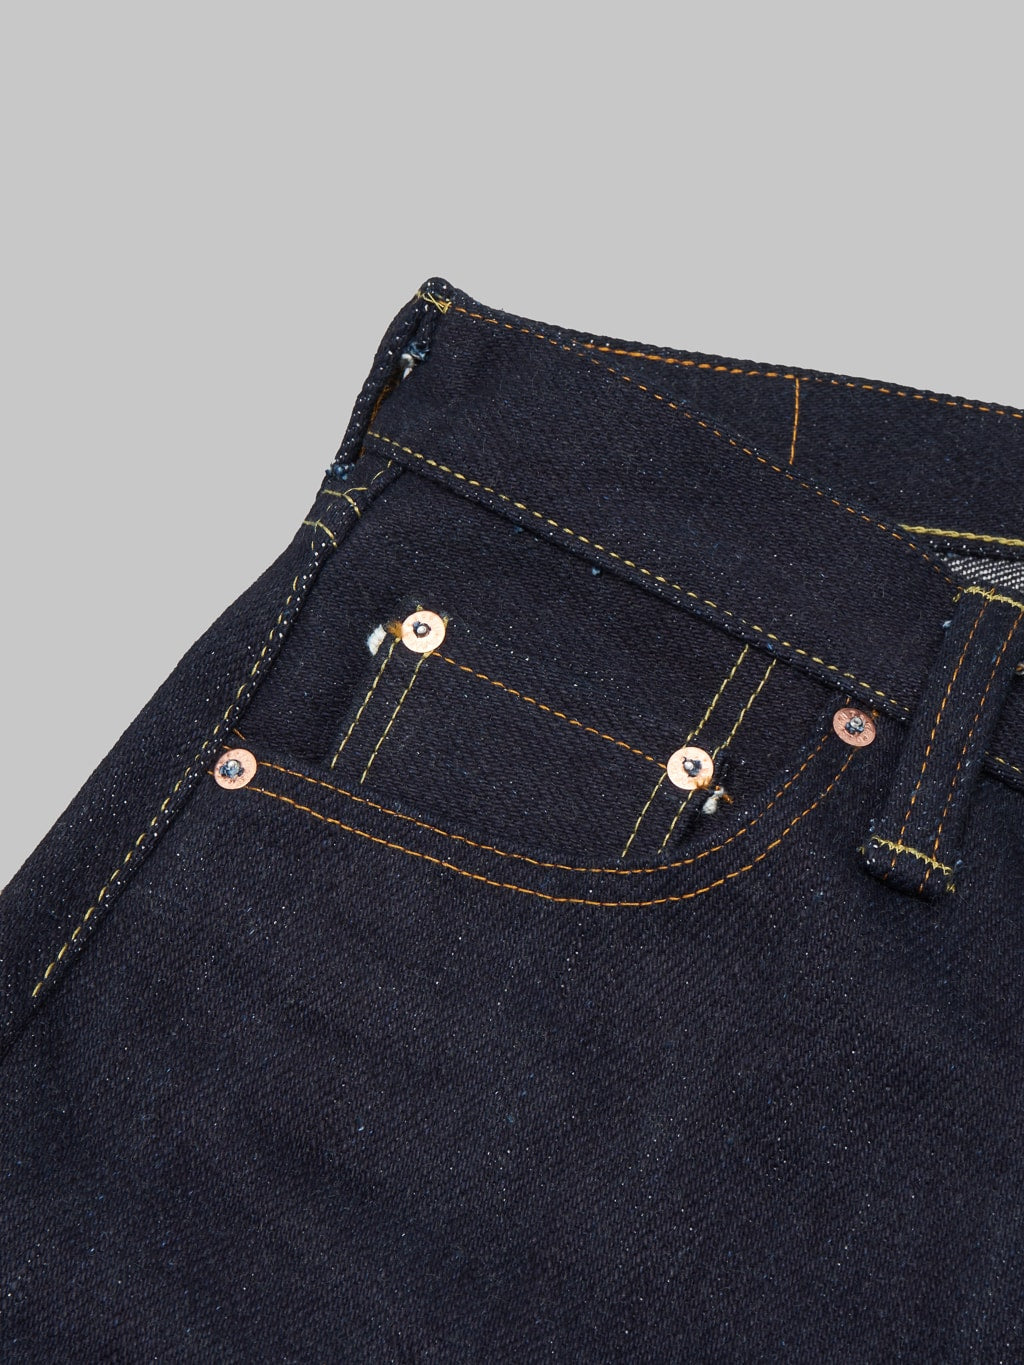 The Strike Gold Extra Heavyweight straight tapered jeans front pocket detail